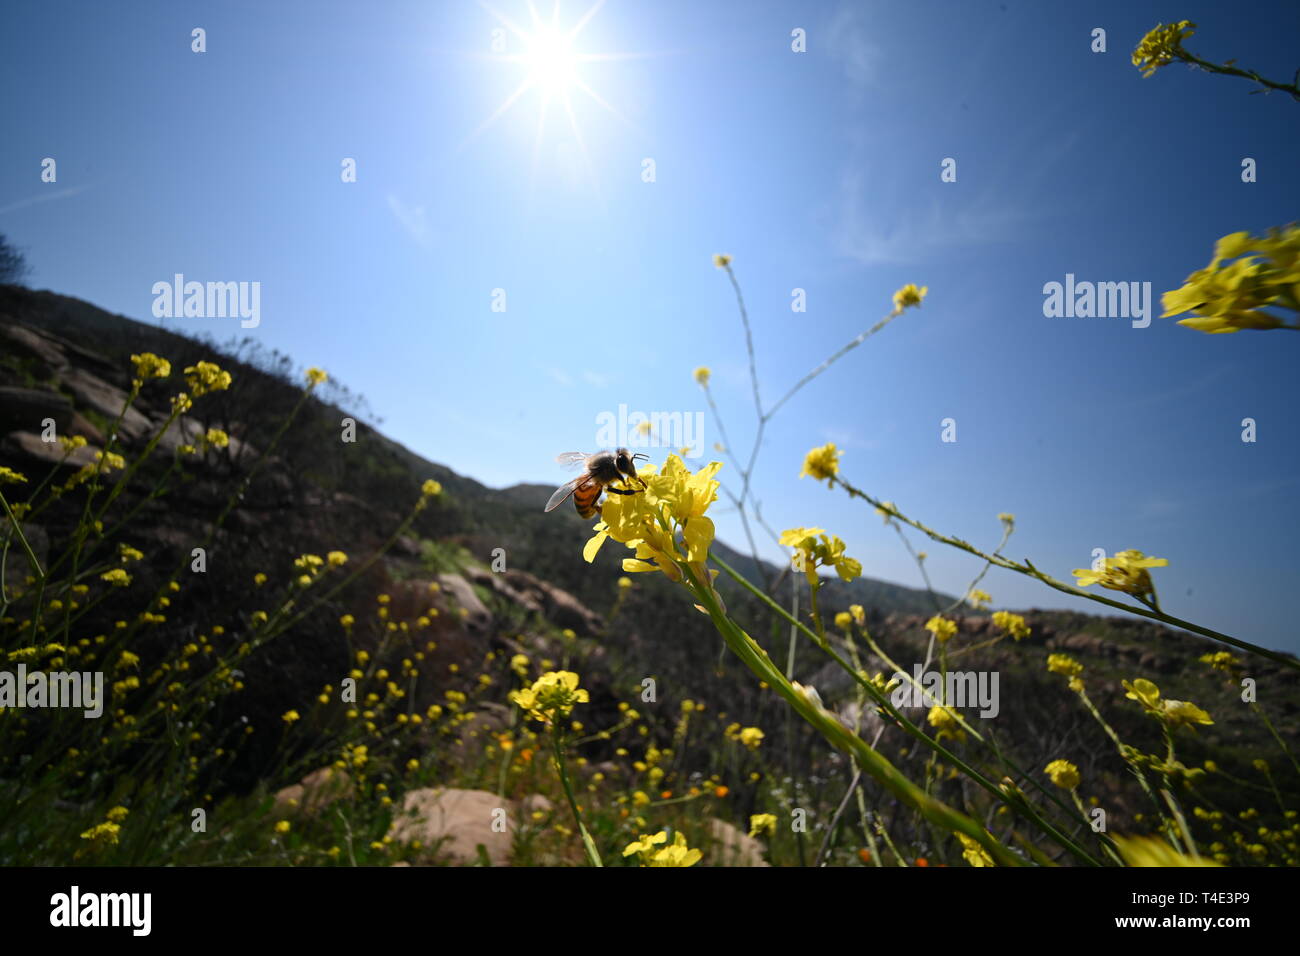 Bee pollinating flower with the sun in the sky Stock Photo